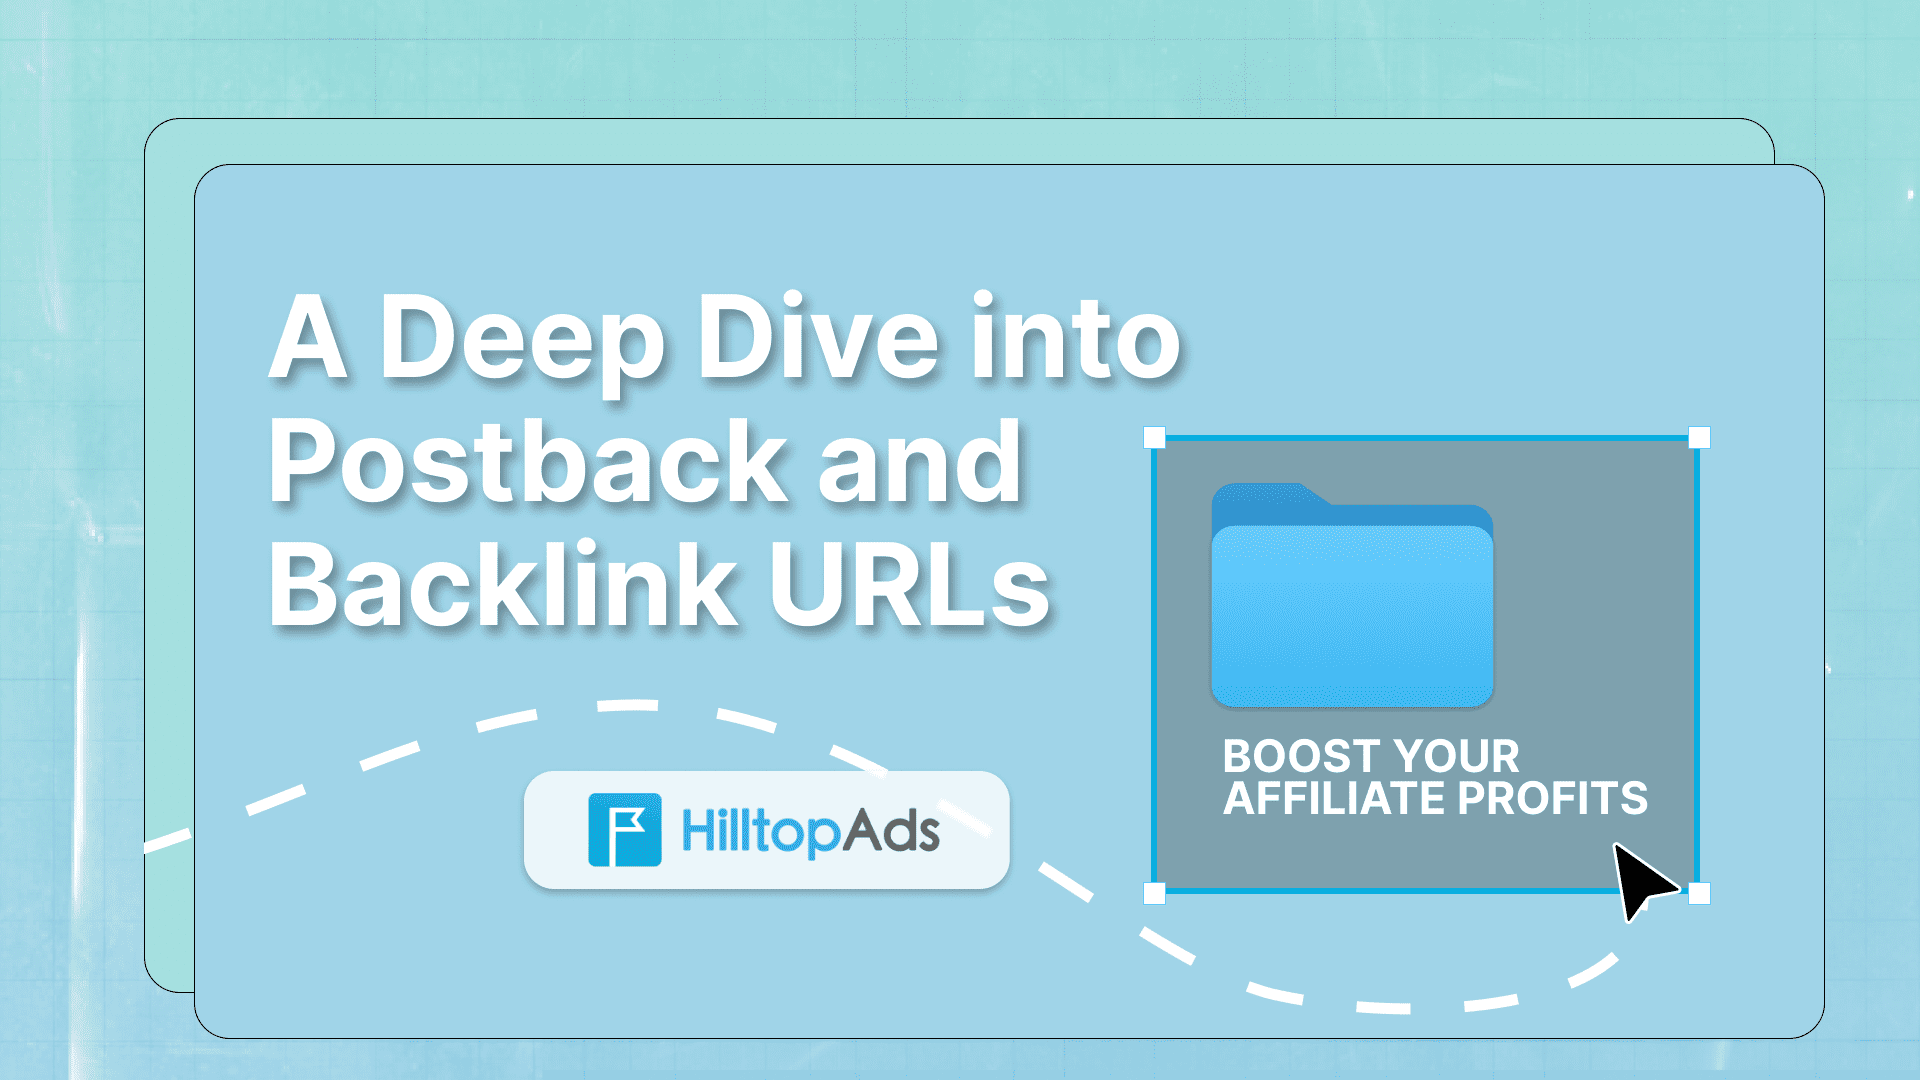 Boost Your Affiliate Profits: A Deep Dive into Postback and Backlink URLs